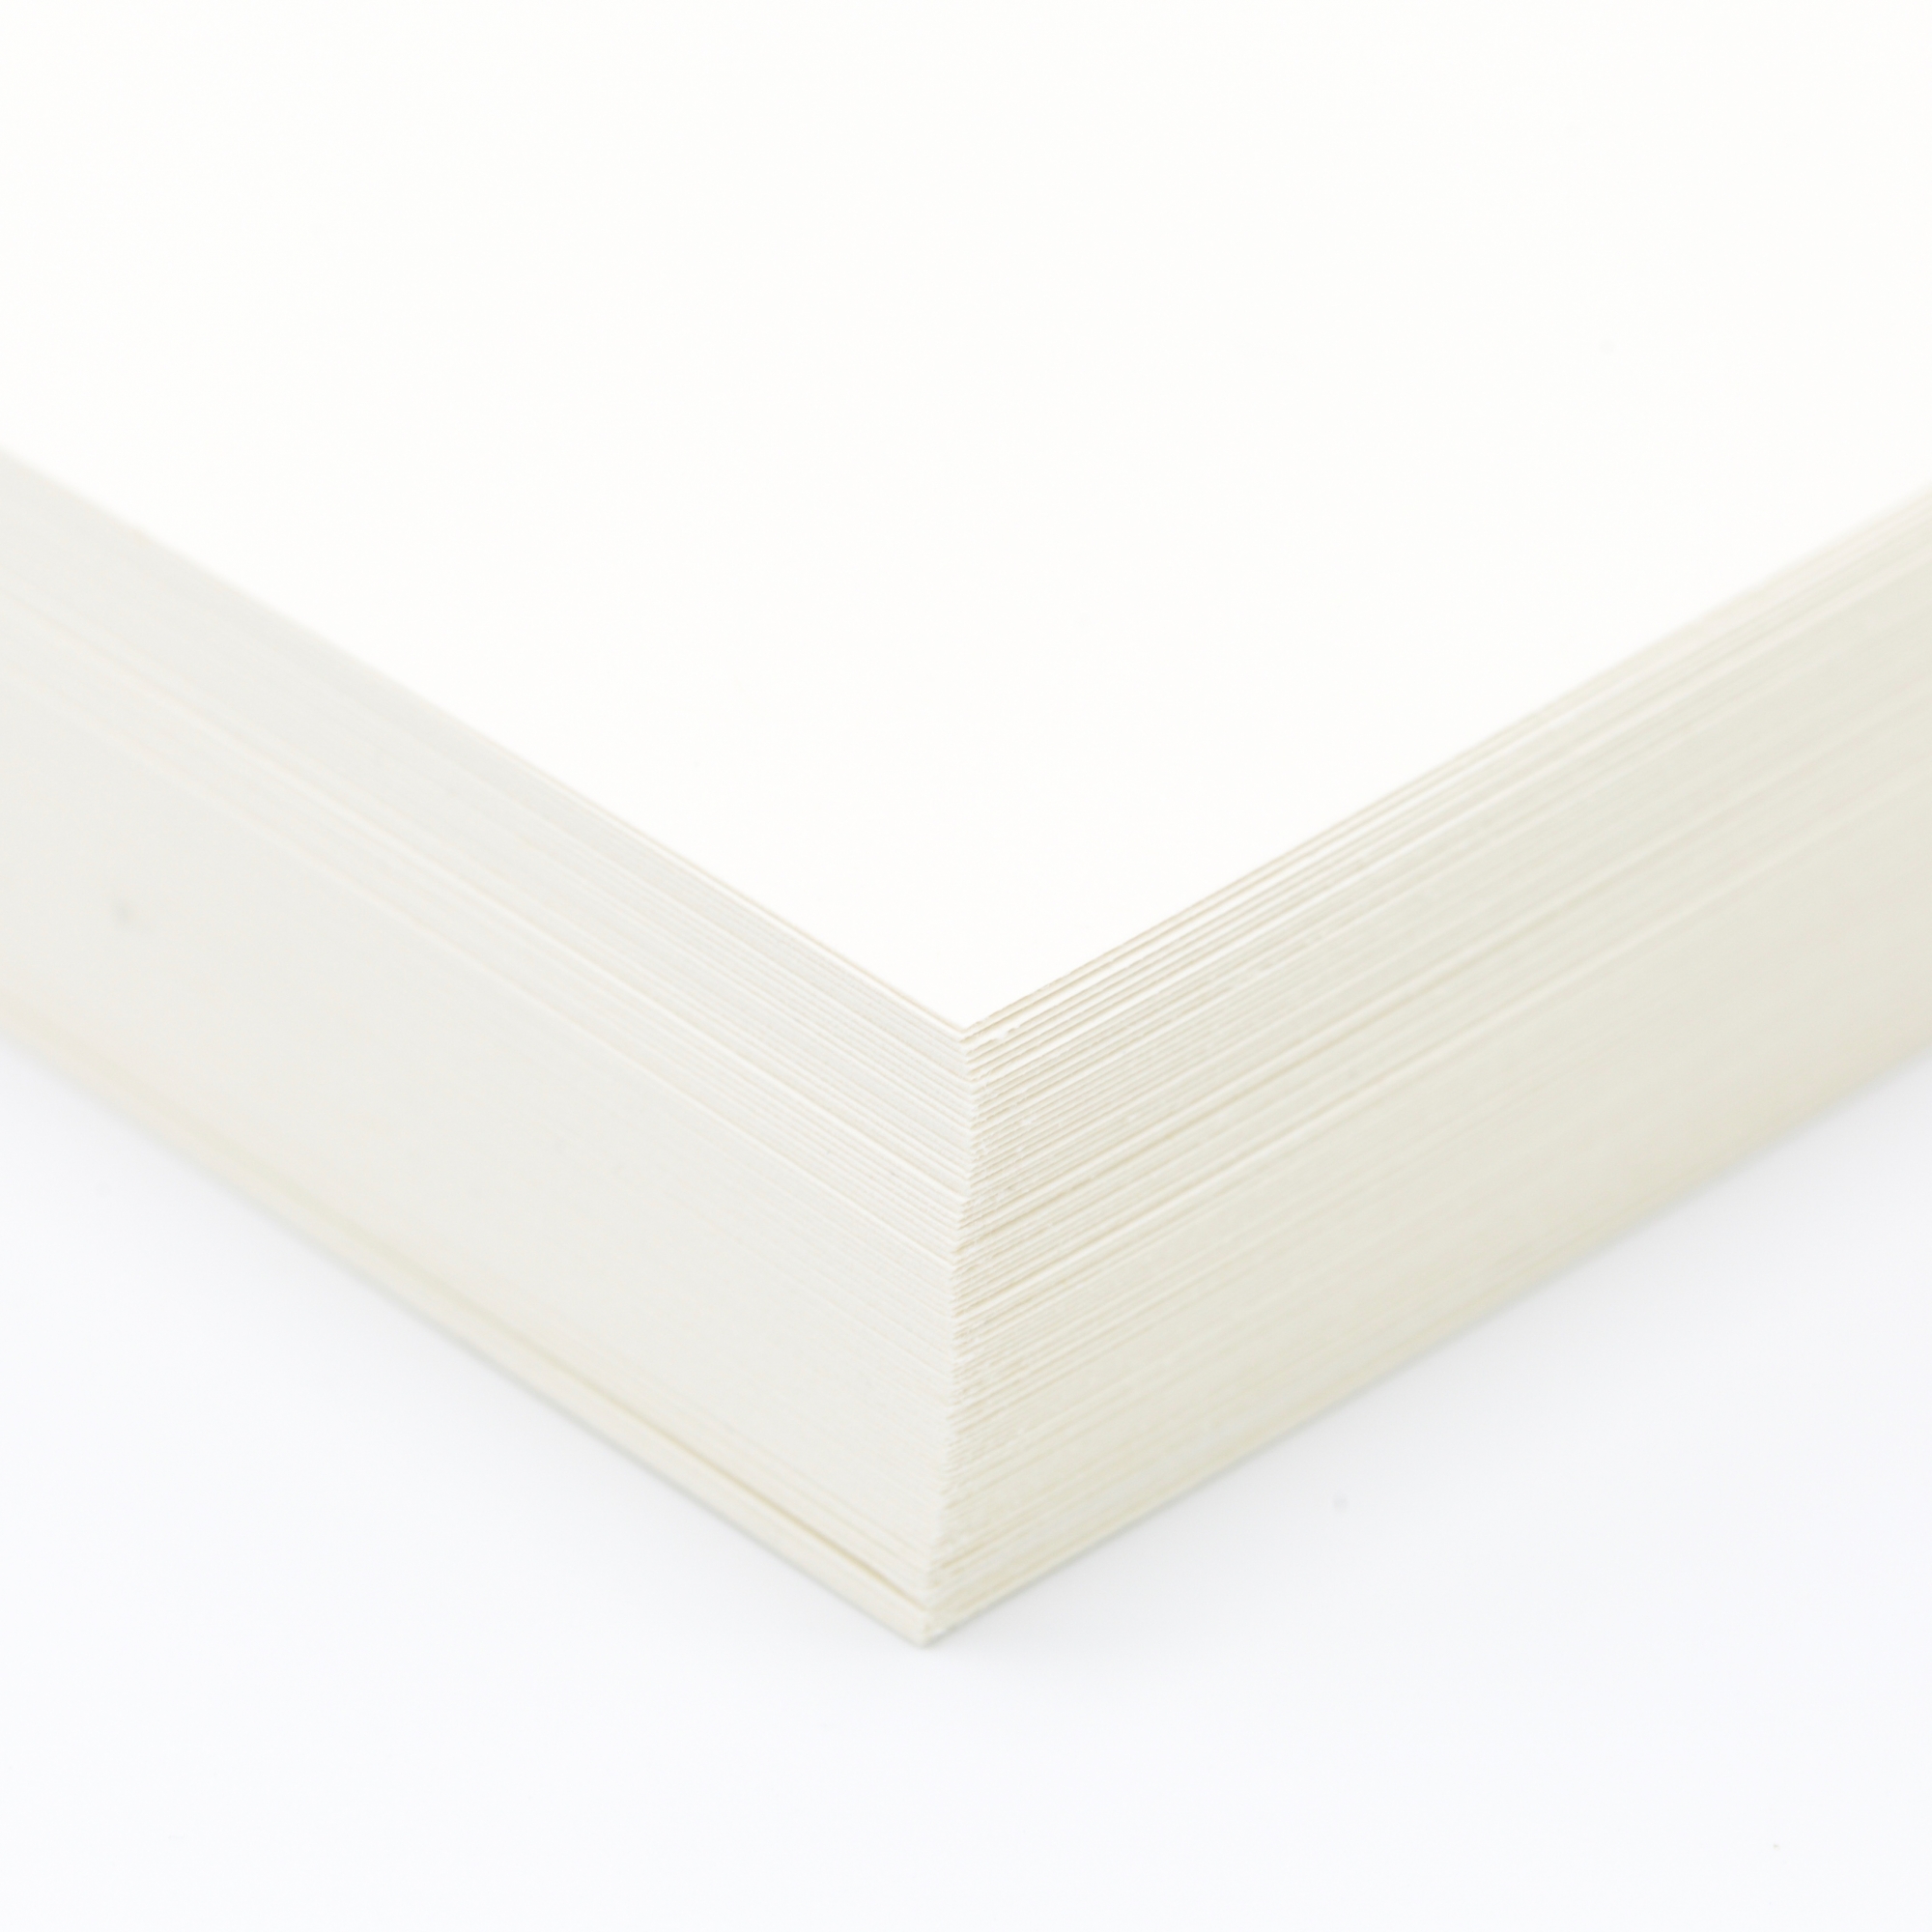 Classic Crest Solar White Envelopes - A7 (5 1/4 x 7 1/4) 80 lb Text Smooth 250 per Box | The Paper Mill Store